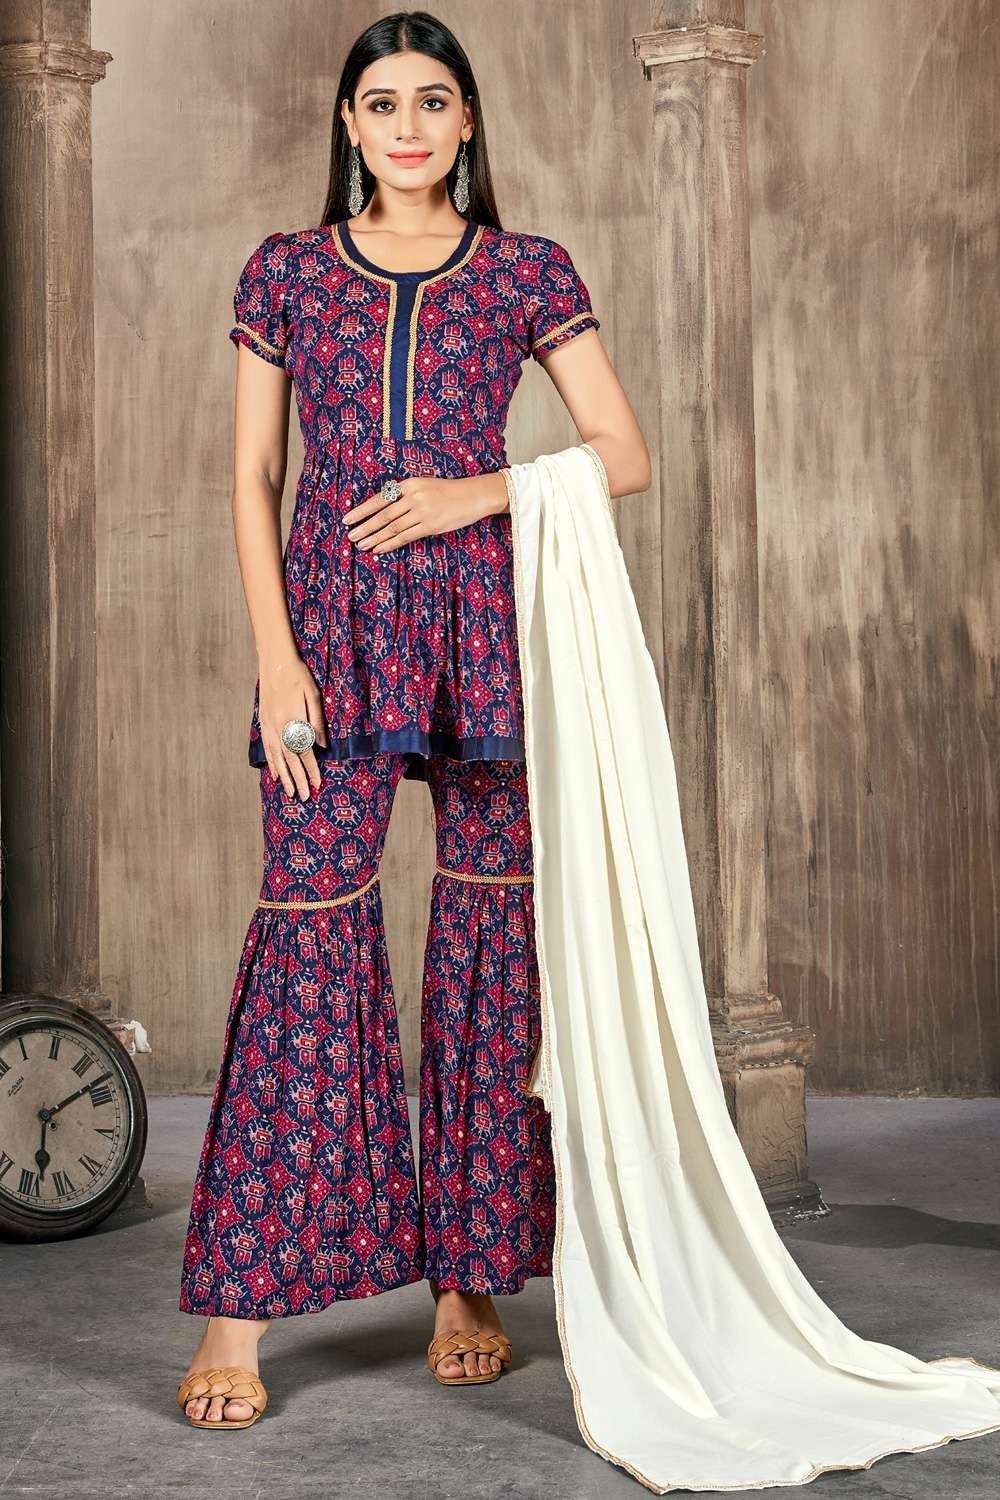 Buy Cream Patiala Salwar Cotton for Best Price, Reviews, Free Shipping